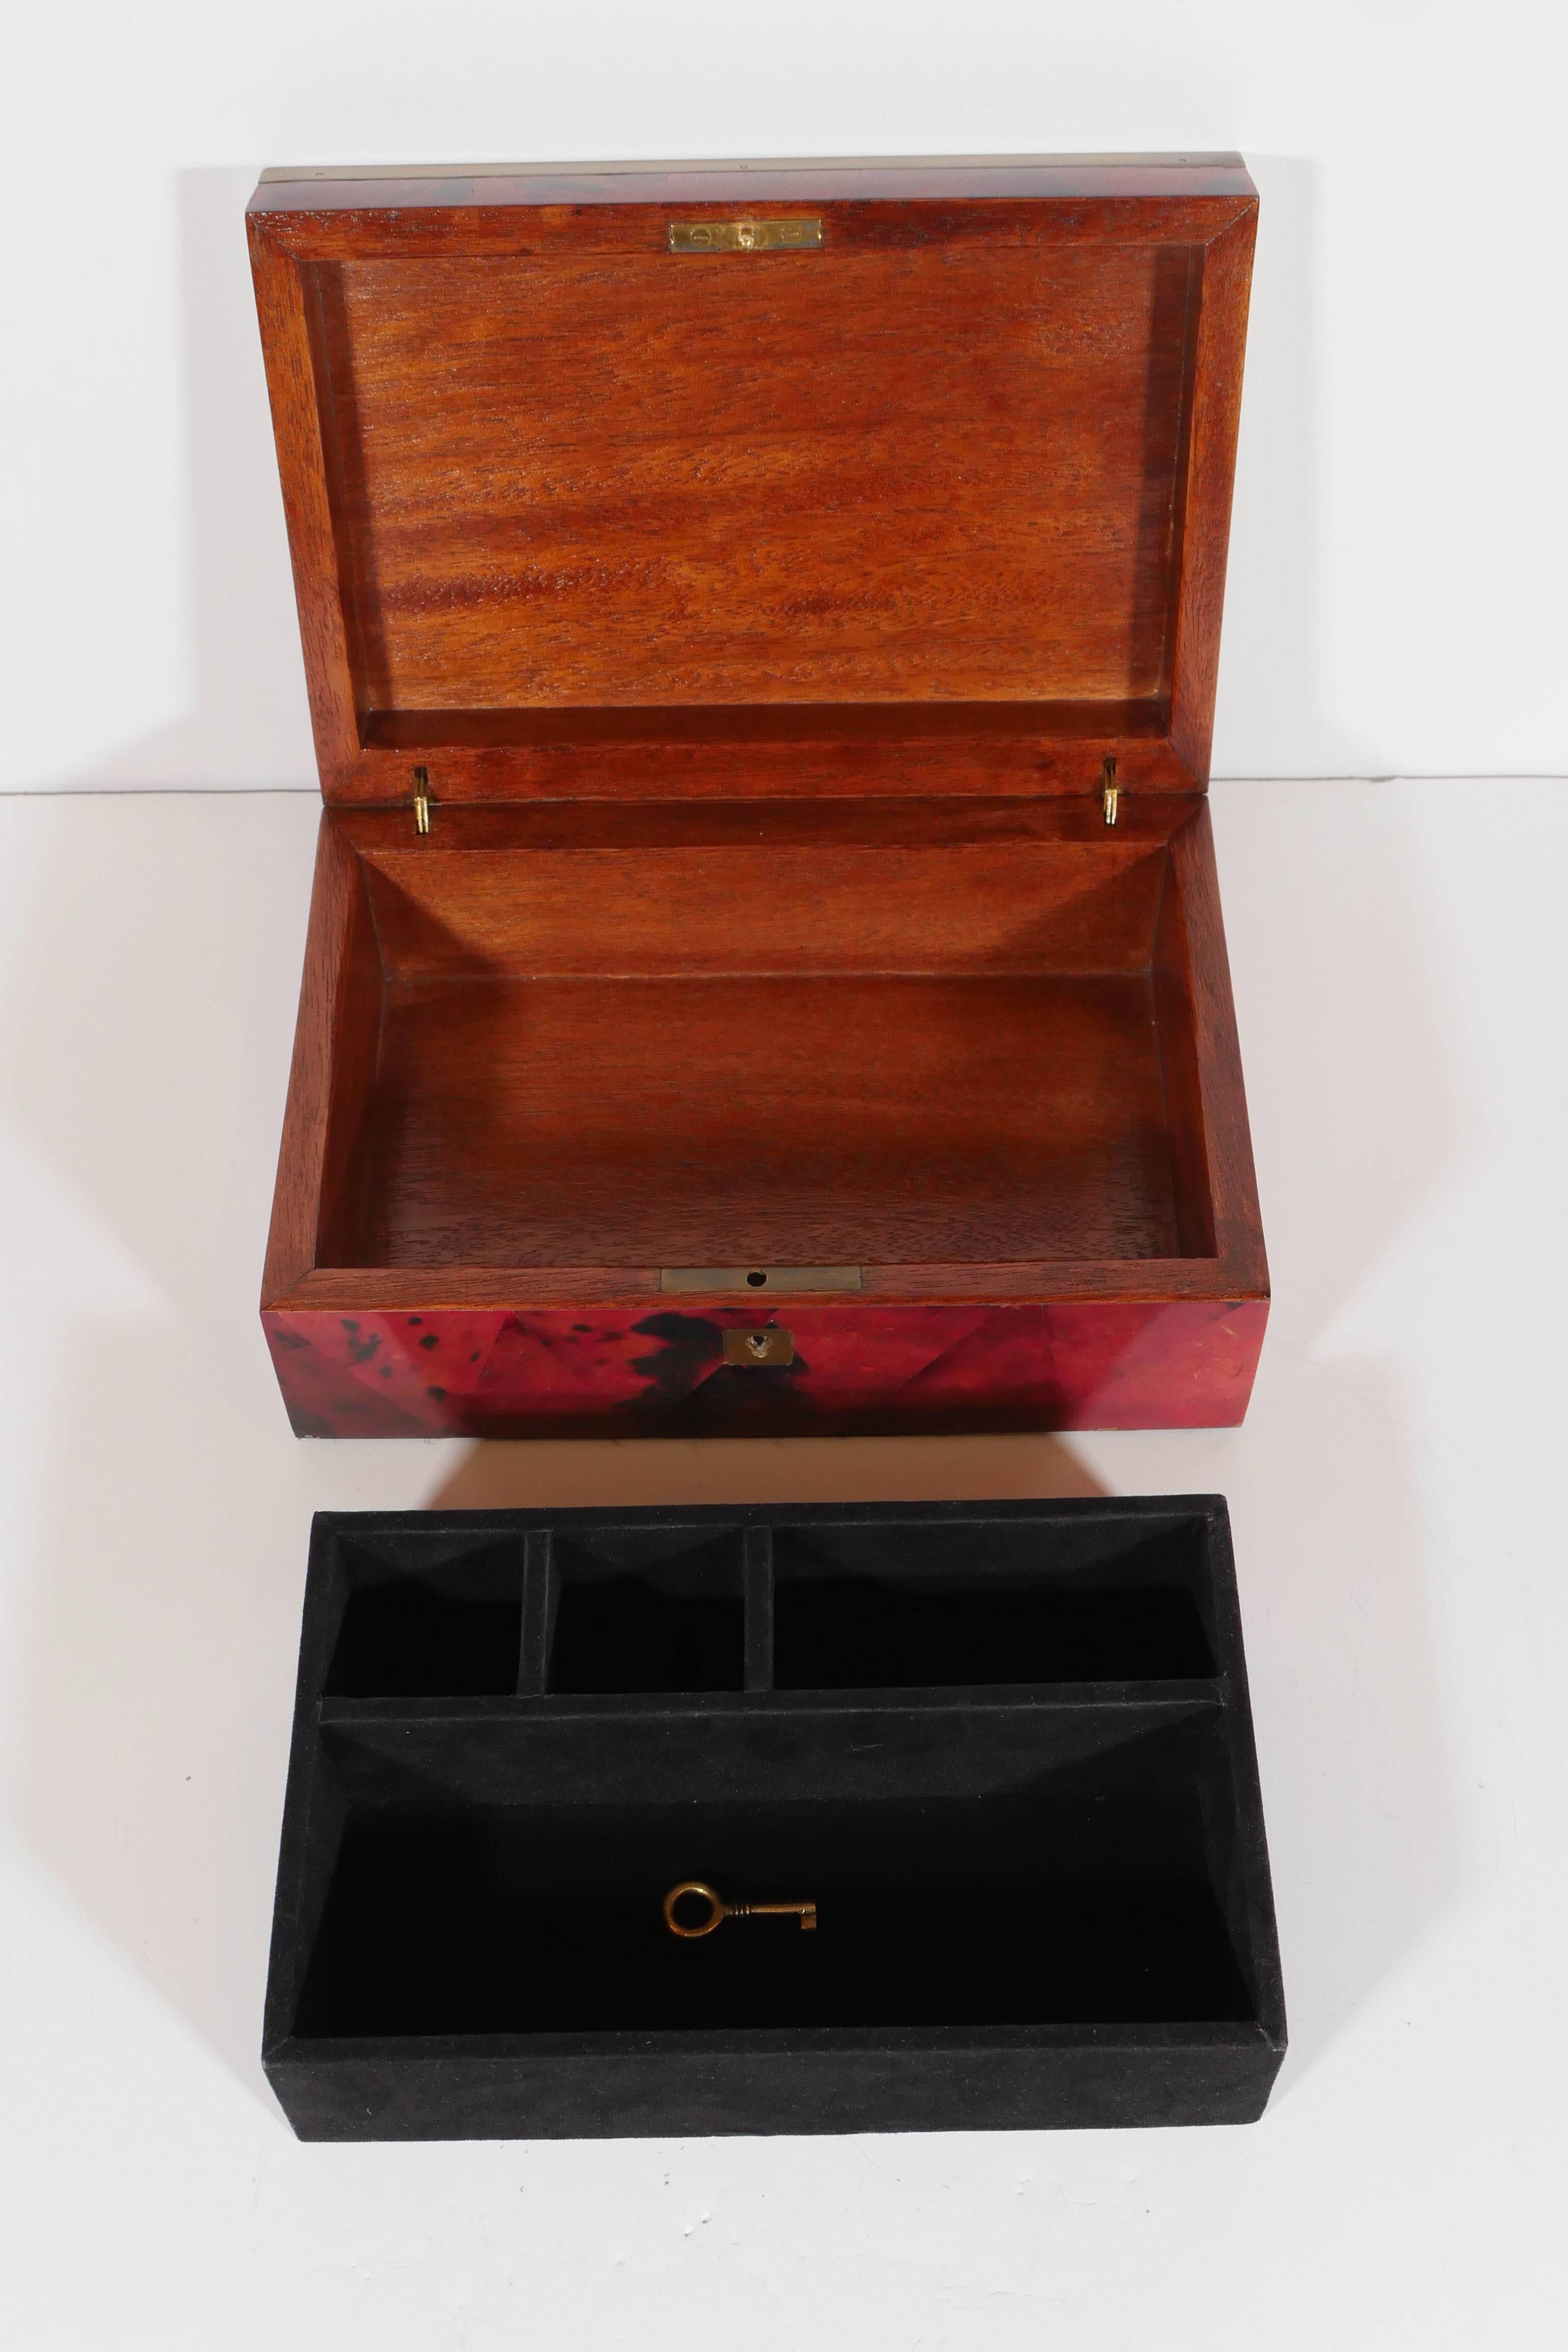 20th Century Exceptional Jewelry Box in Lacquered Pen Shell with Exotic Feather Accents